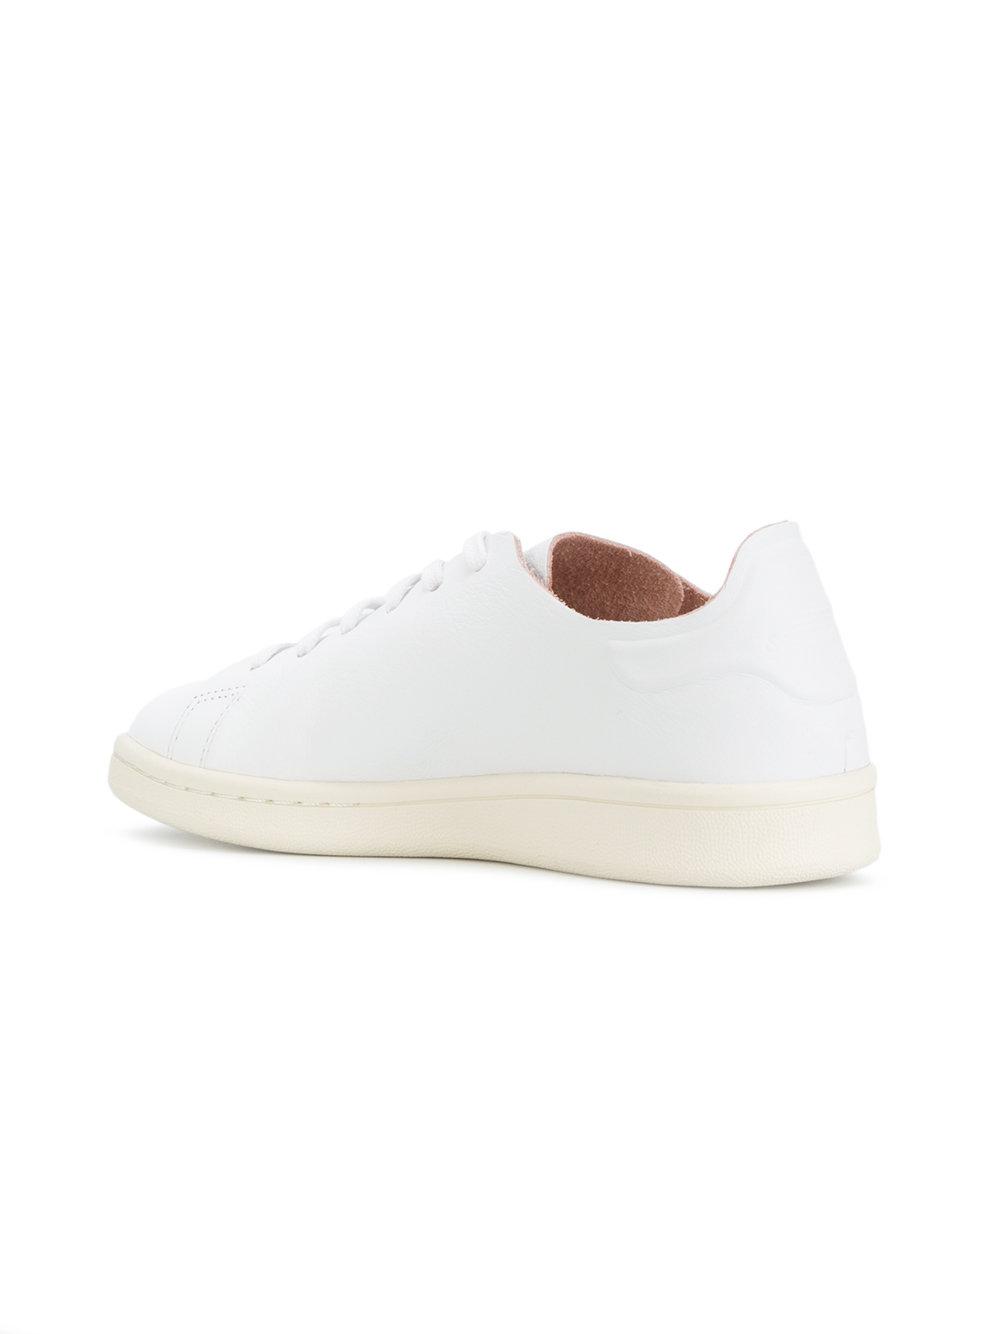 adidas Leather Stan Smith Nude Sneakers in White - Lyst